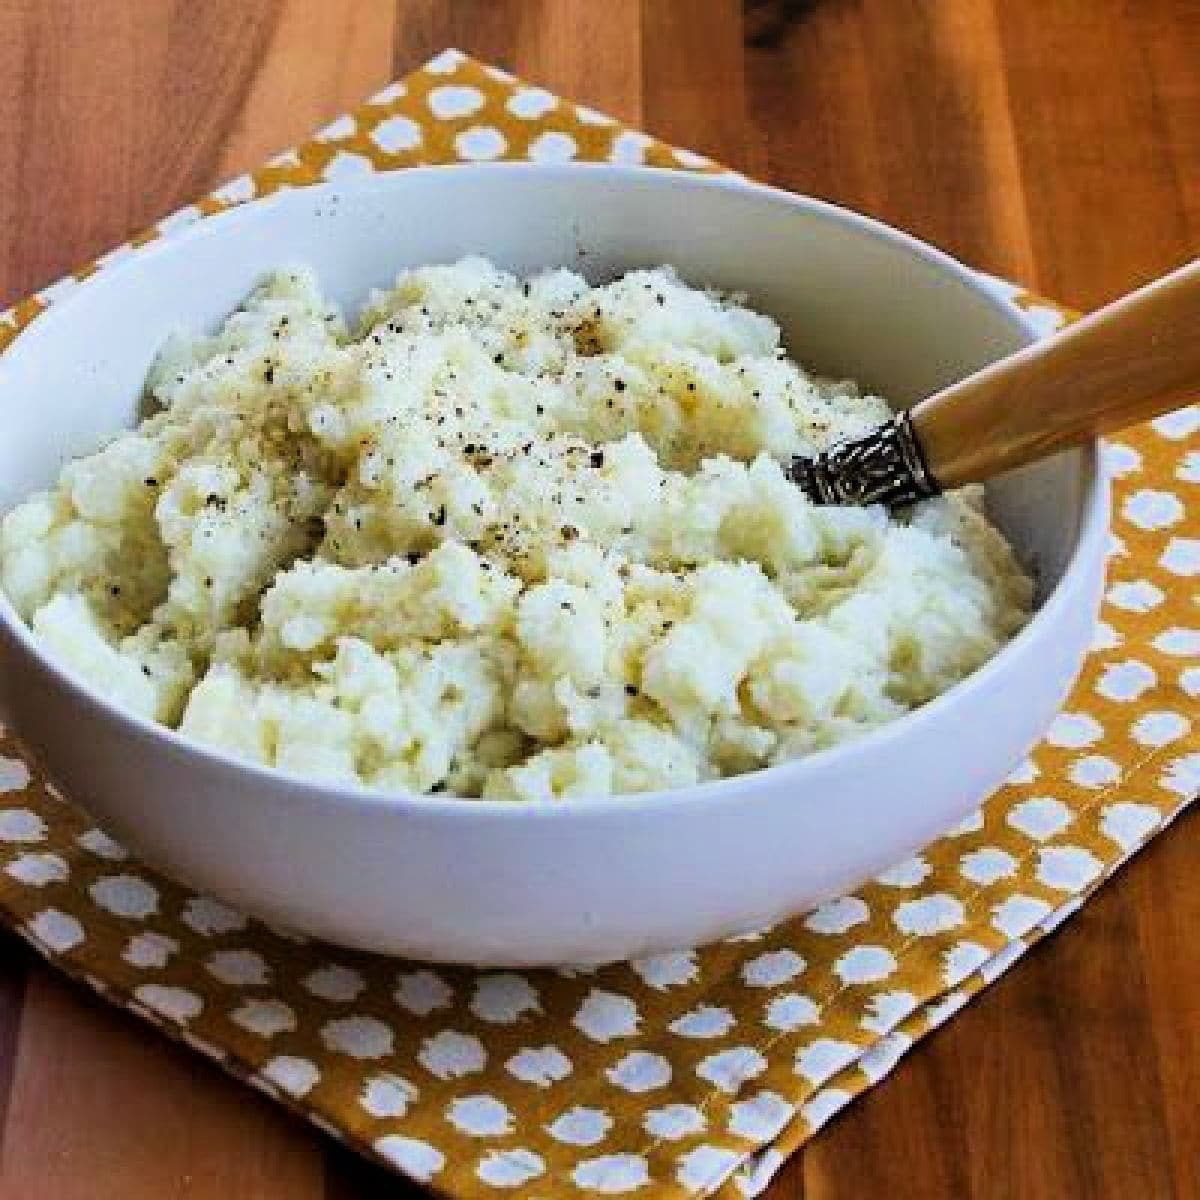 Square image for Pureed Cauliflower with Garlic, Parmesan, and Goat Cheese shown in serving bowl with spoon.